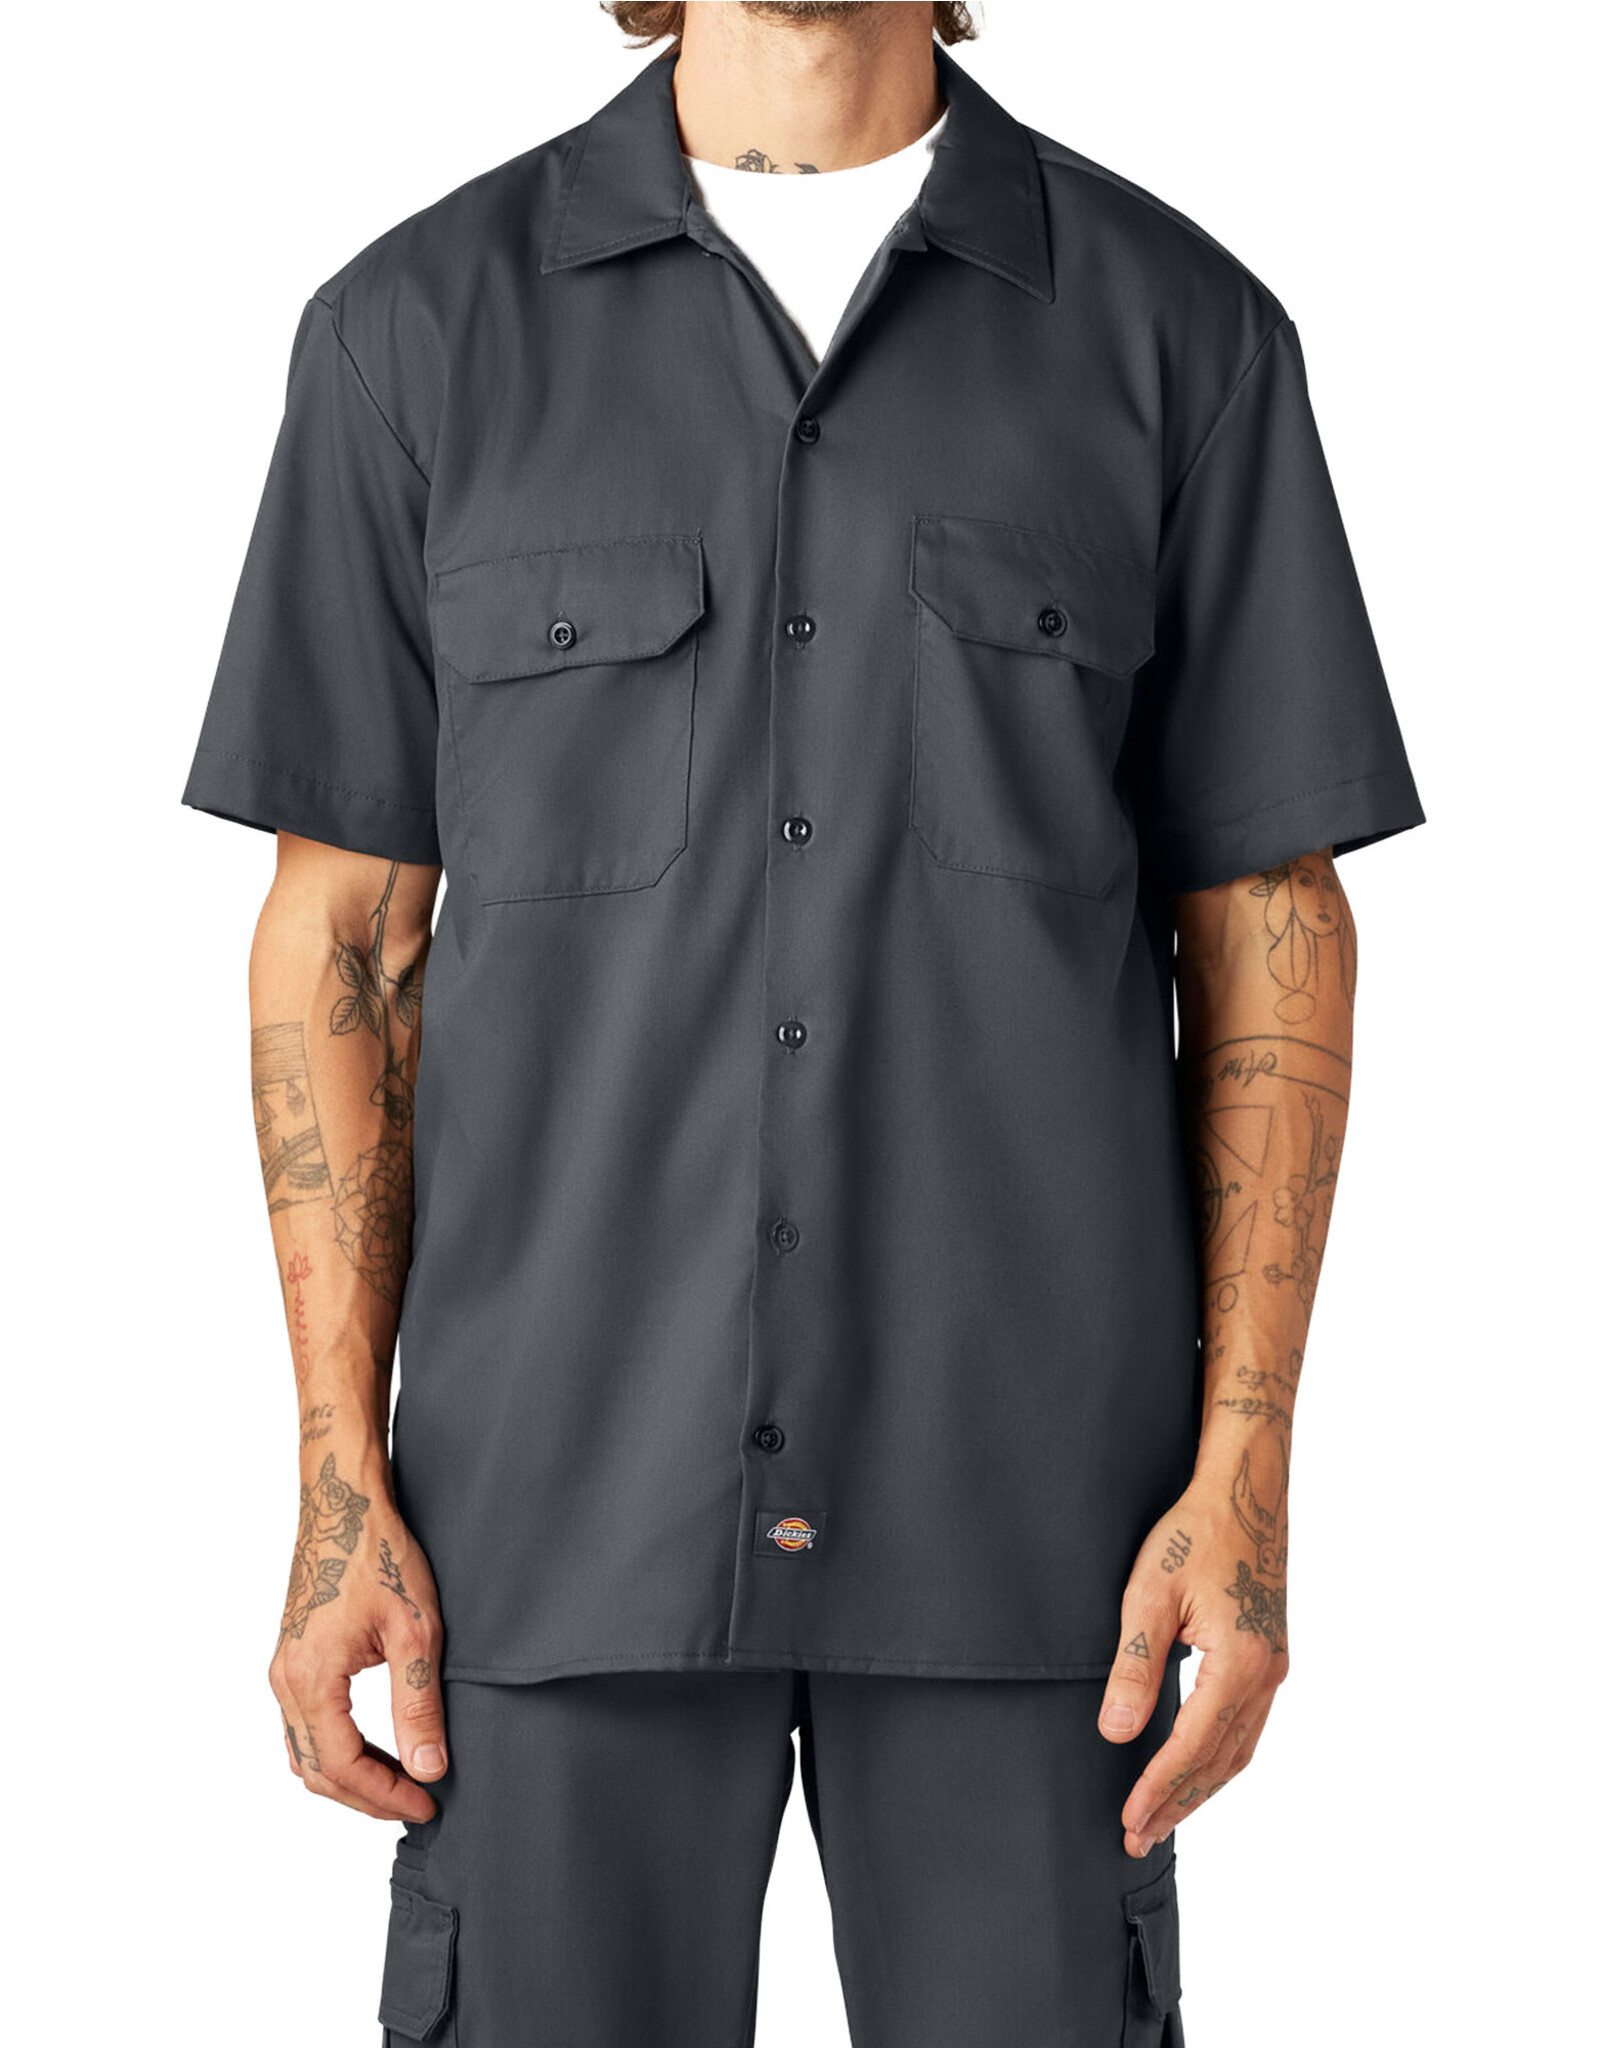 DICKIES Short Sleeve Twill Work Shirt Charcoal - WS675CH